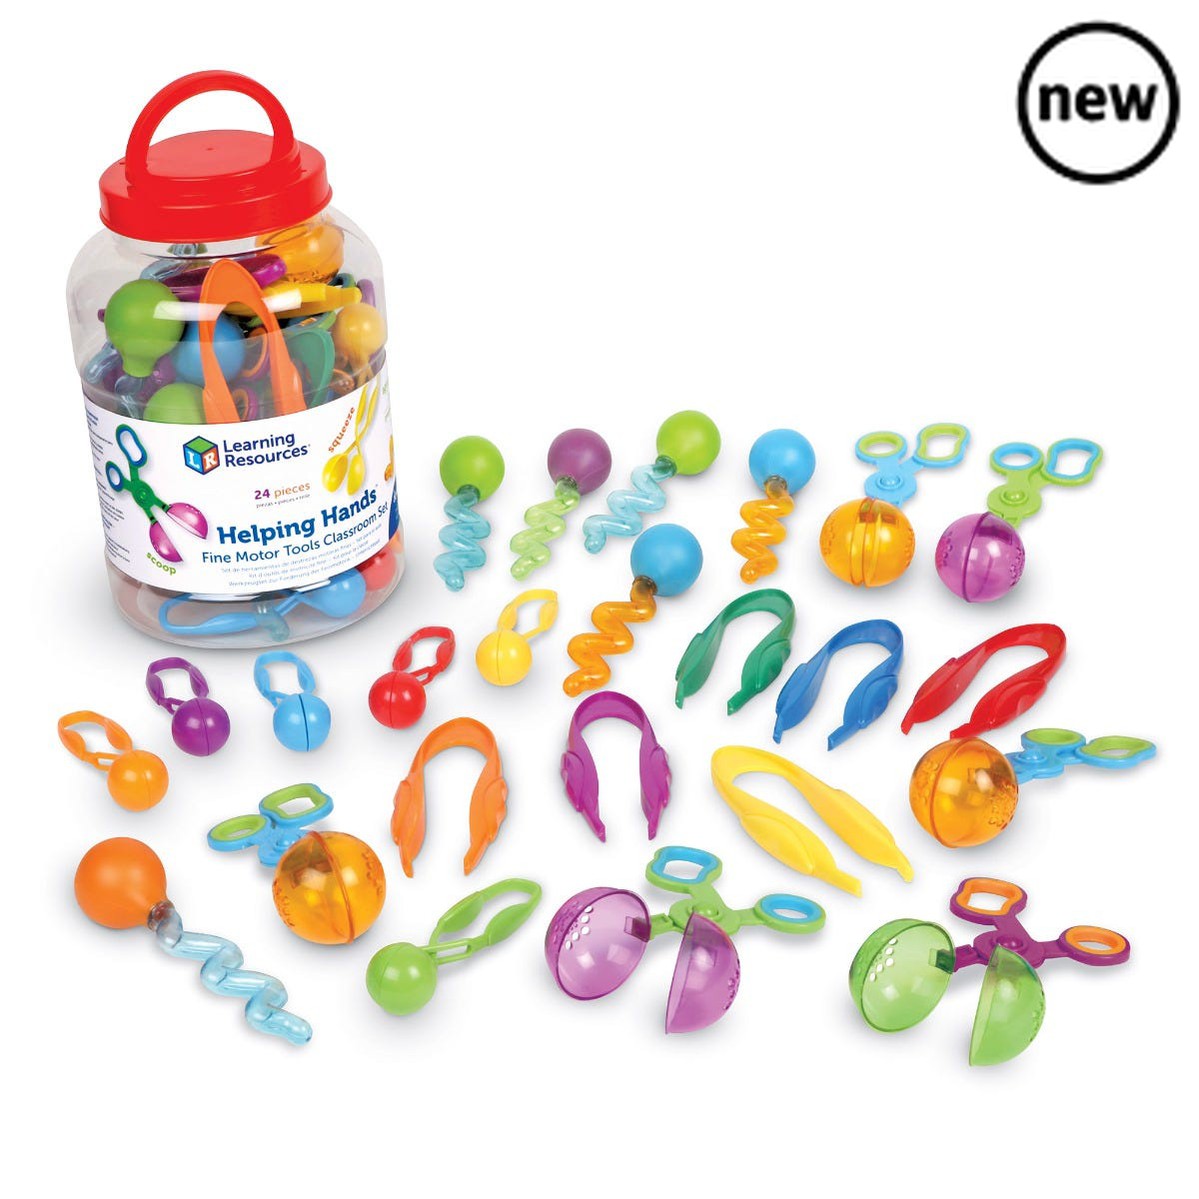 Helping Hands Fine Motor Tools Classroom Set, Children build hand strength and coordination as they grab, scoop, and squeeze with this fine motor tool set for schools. The Helping Hands Fine Motor Tools Classroom Set has 24 of our best-selling fine motor tools – that’s 6 each of our Squeezy Tweezers™, Twisty Droppers™, Handy Scoopers™, and Jumbo Tweezers™. The tools store in the reusable storage tub with convenient carrier handle are the learning fun is over for the day. Perfect for sensory and fine motor a